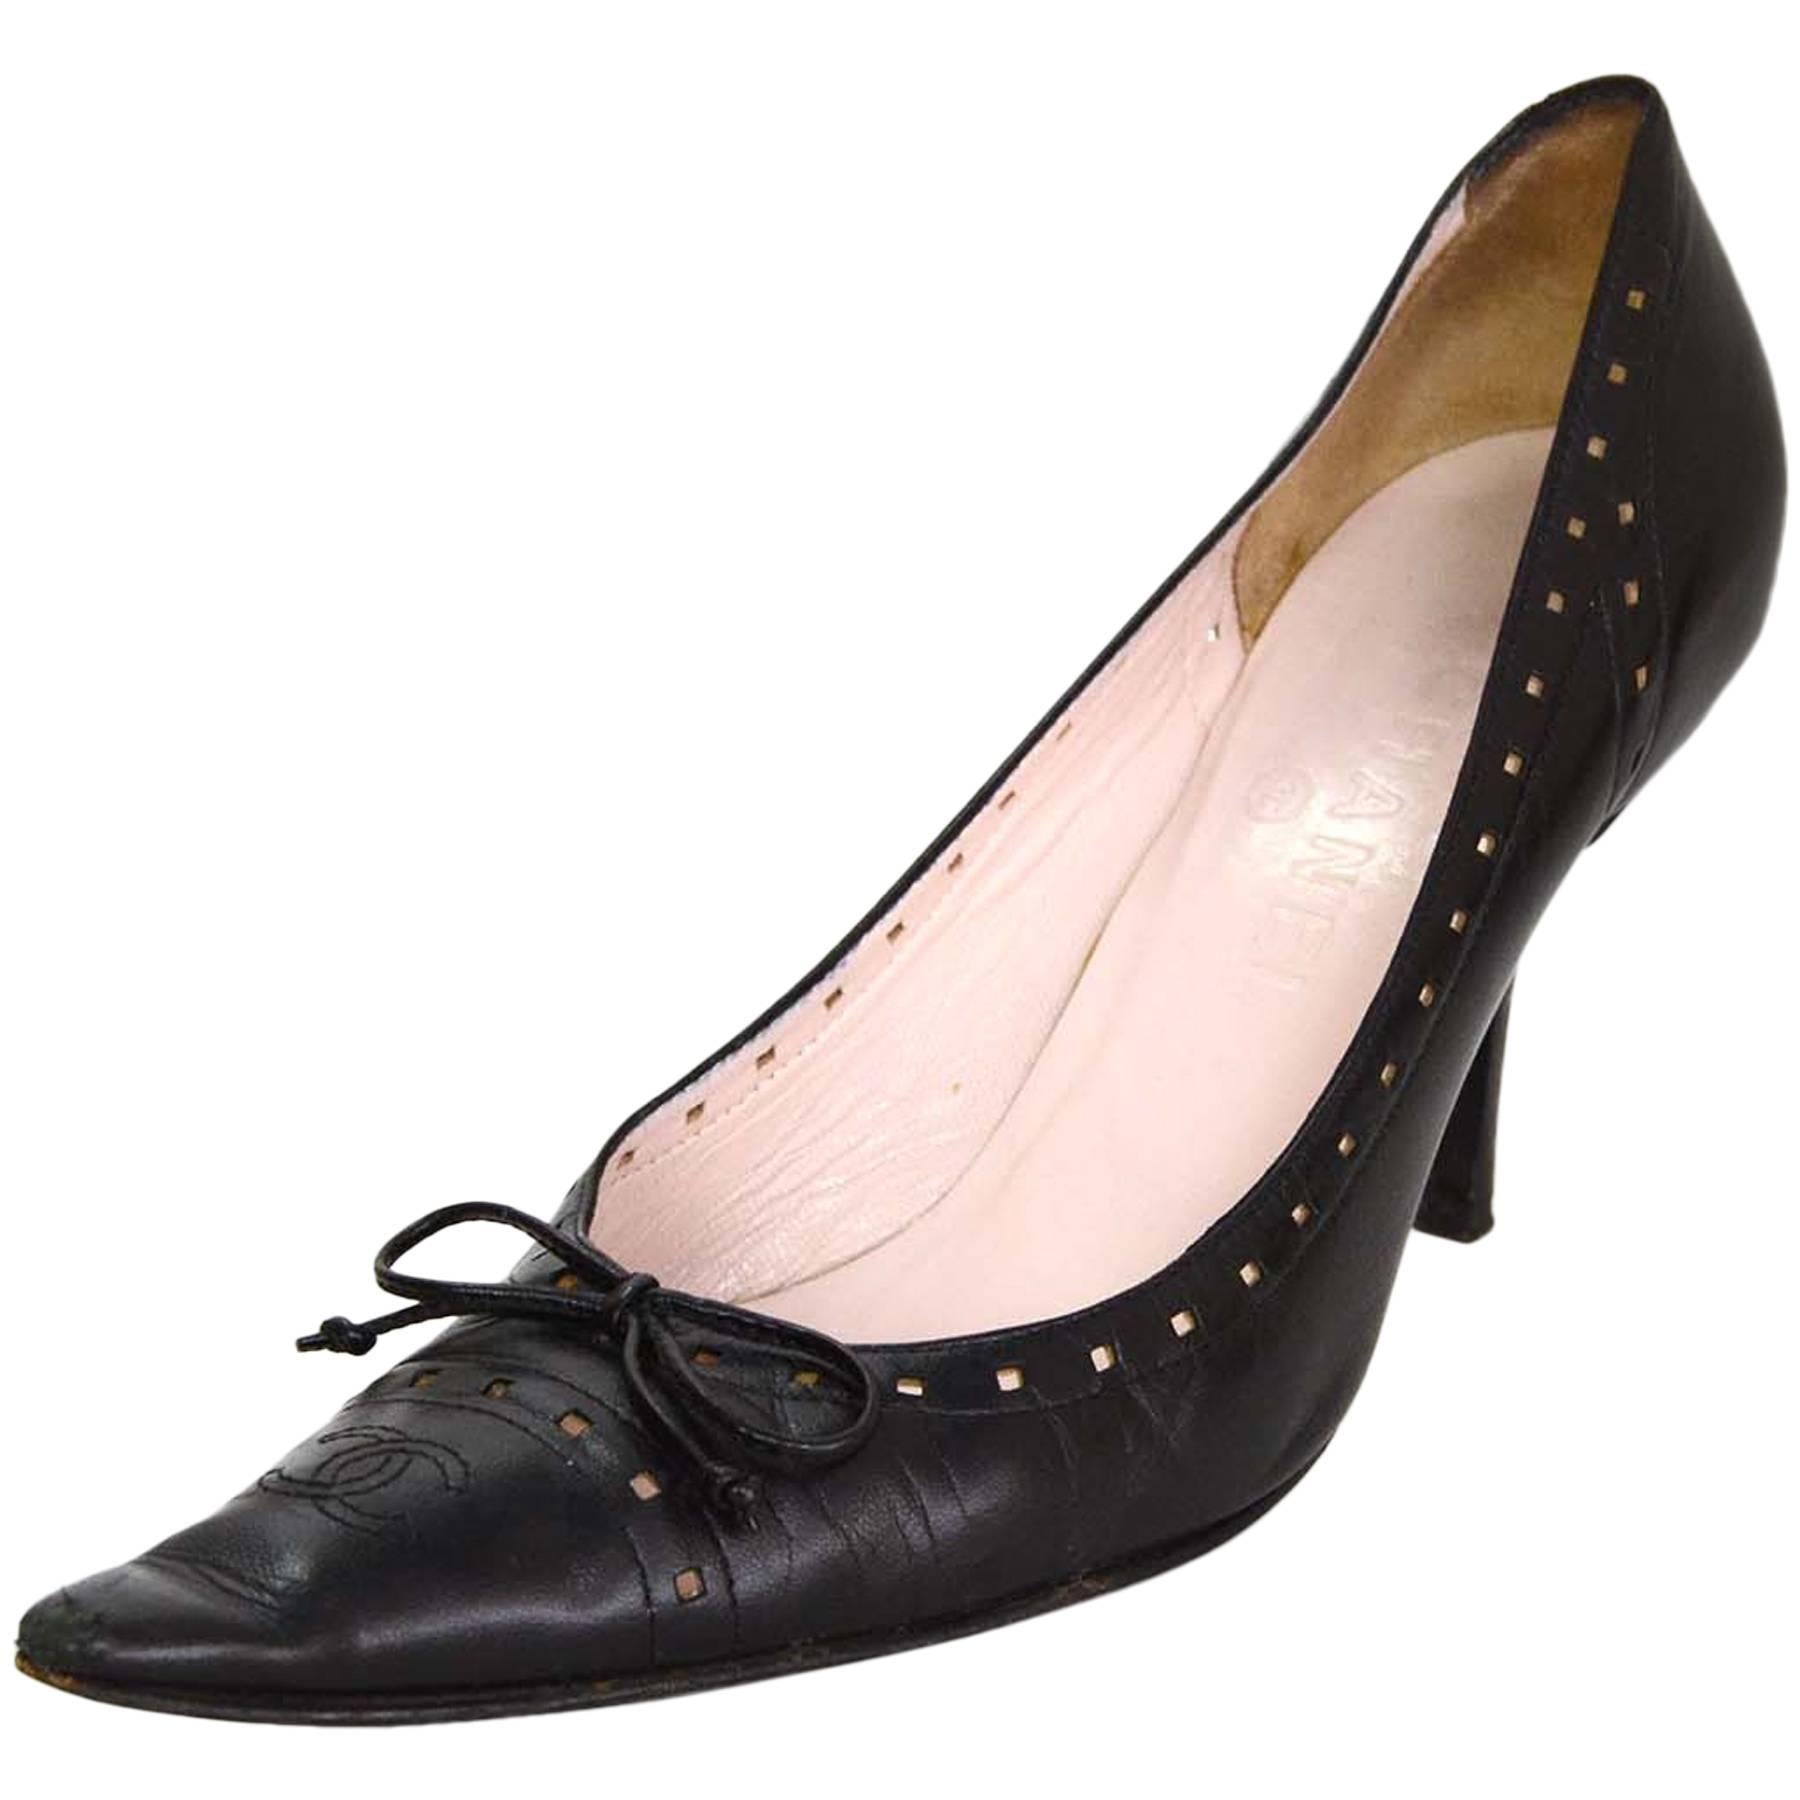 Chanel Perforated Black Pointed Toe Pumps Sz 38.5